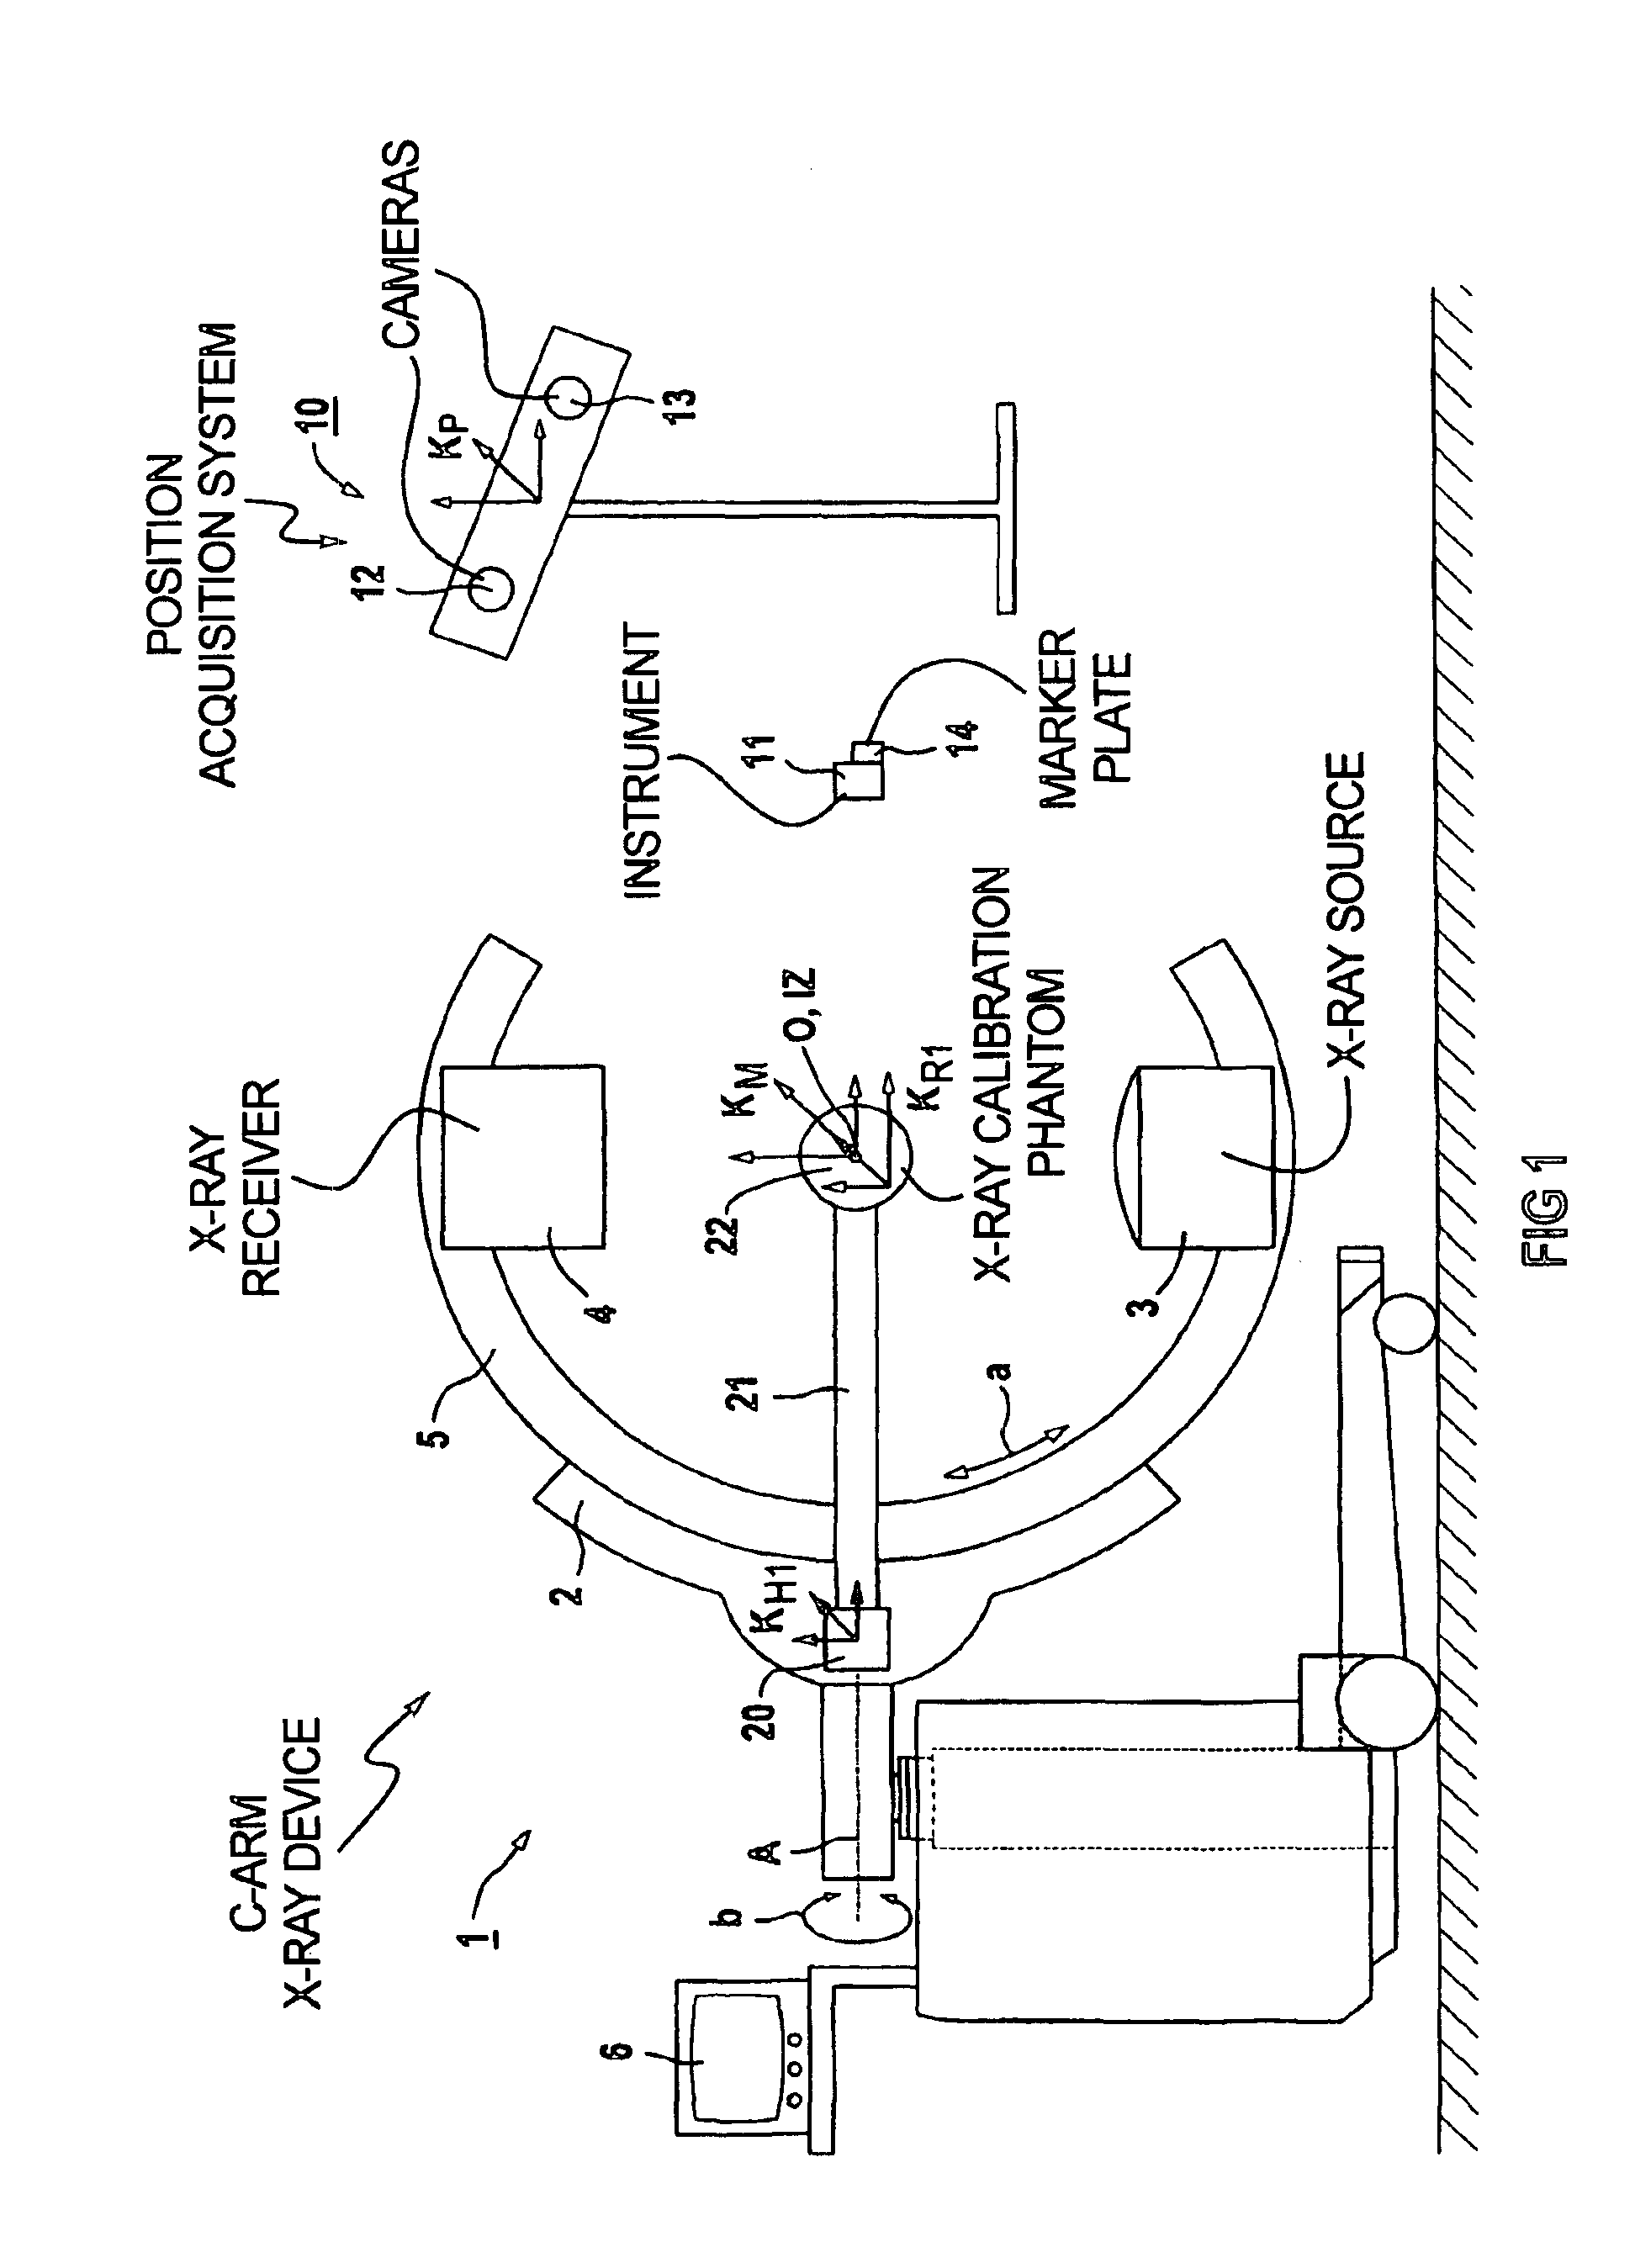 Registration method and apparatus for navigation-guided medical interventions, without the use of patient-associated markers